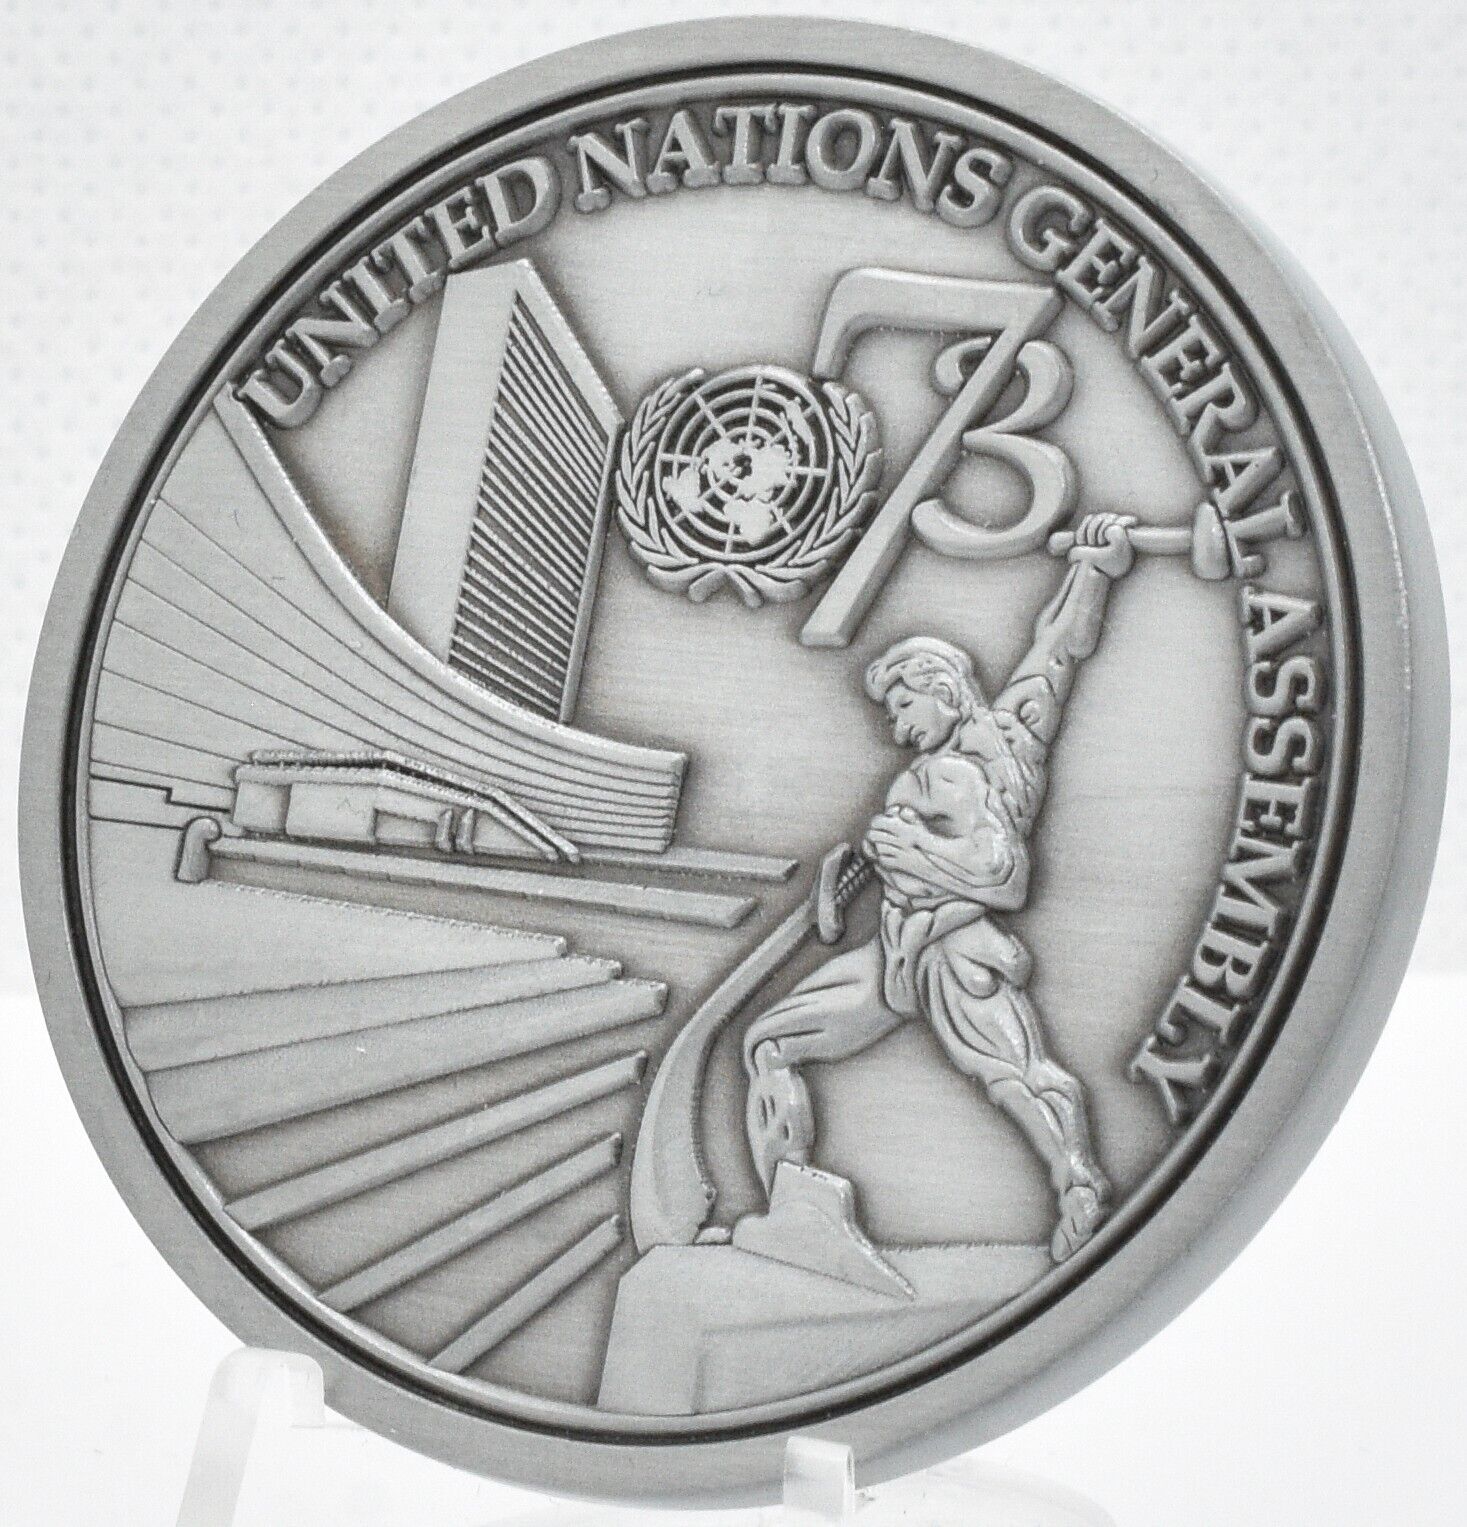 NYPD Intelligence Bureau UNGA United Nations 73rd Session Challenge Coin